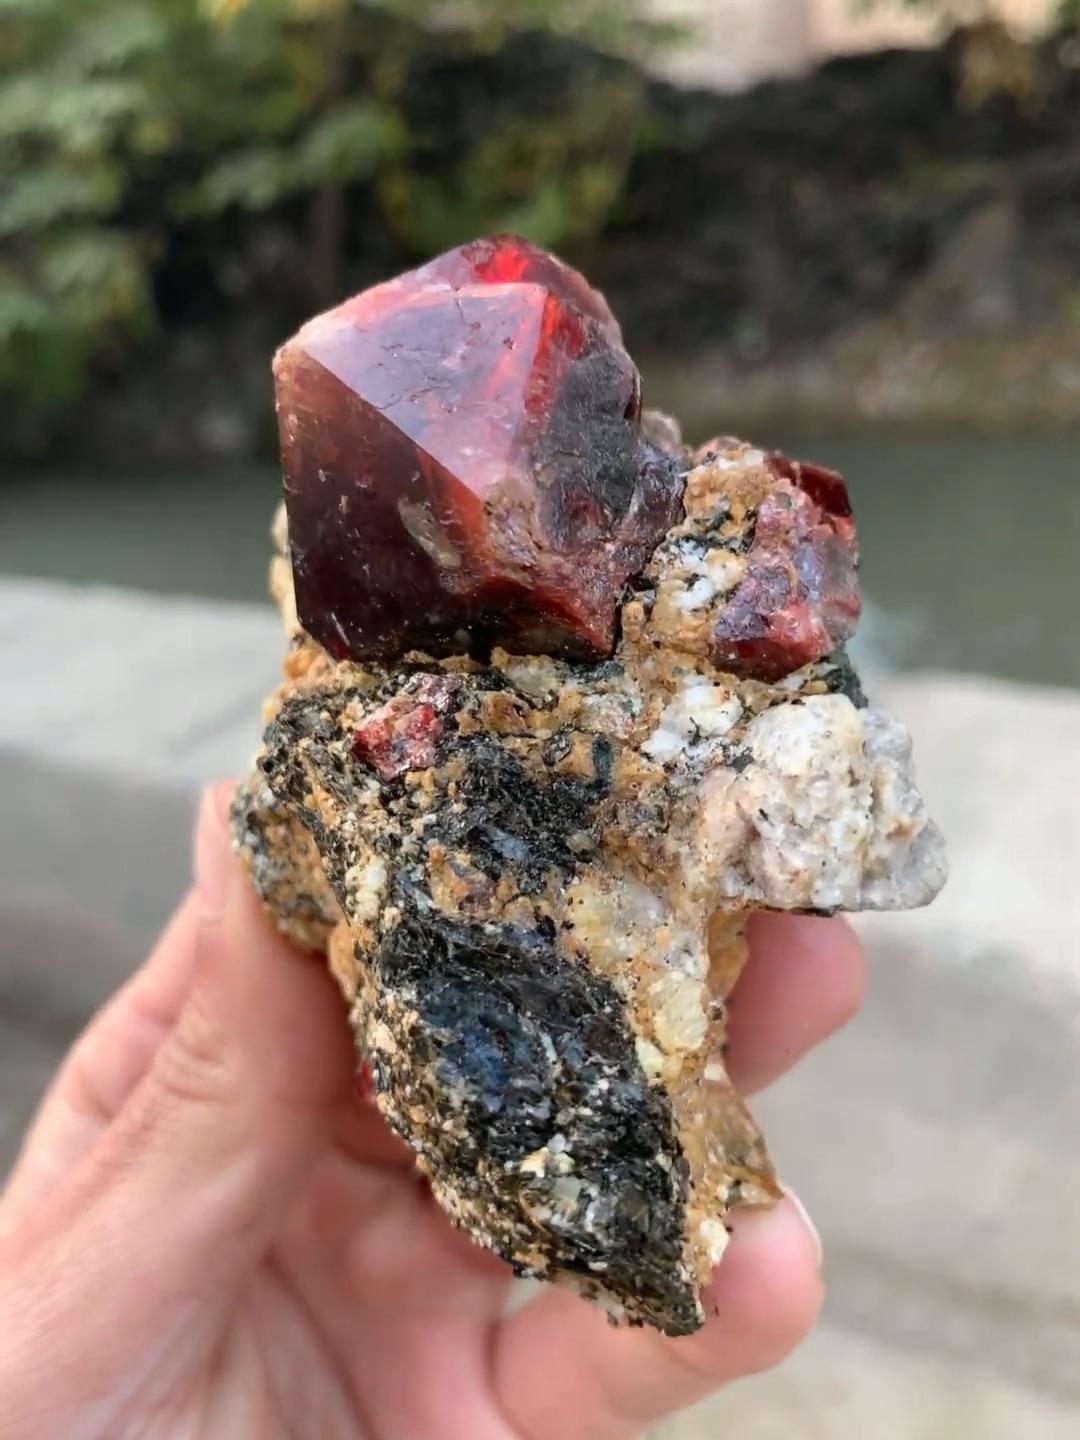 Uncut Isometric Red Zircon Crystal On Graphite And Calcite Matrix From Pakistan For Sale